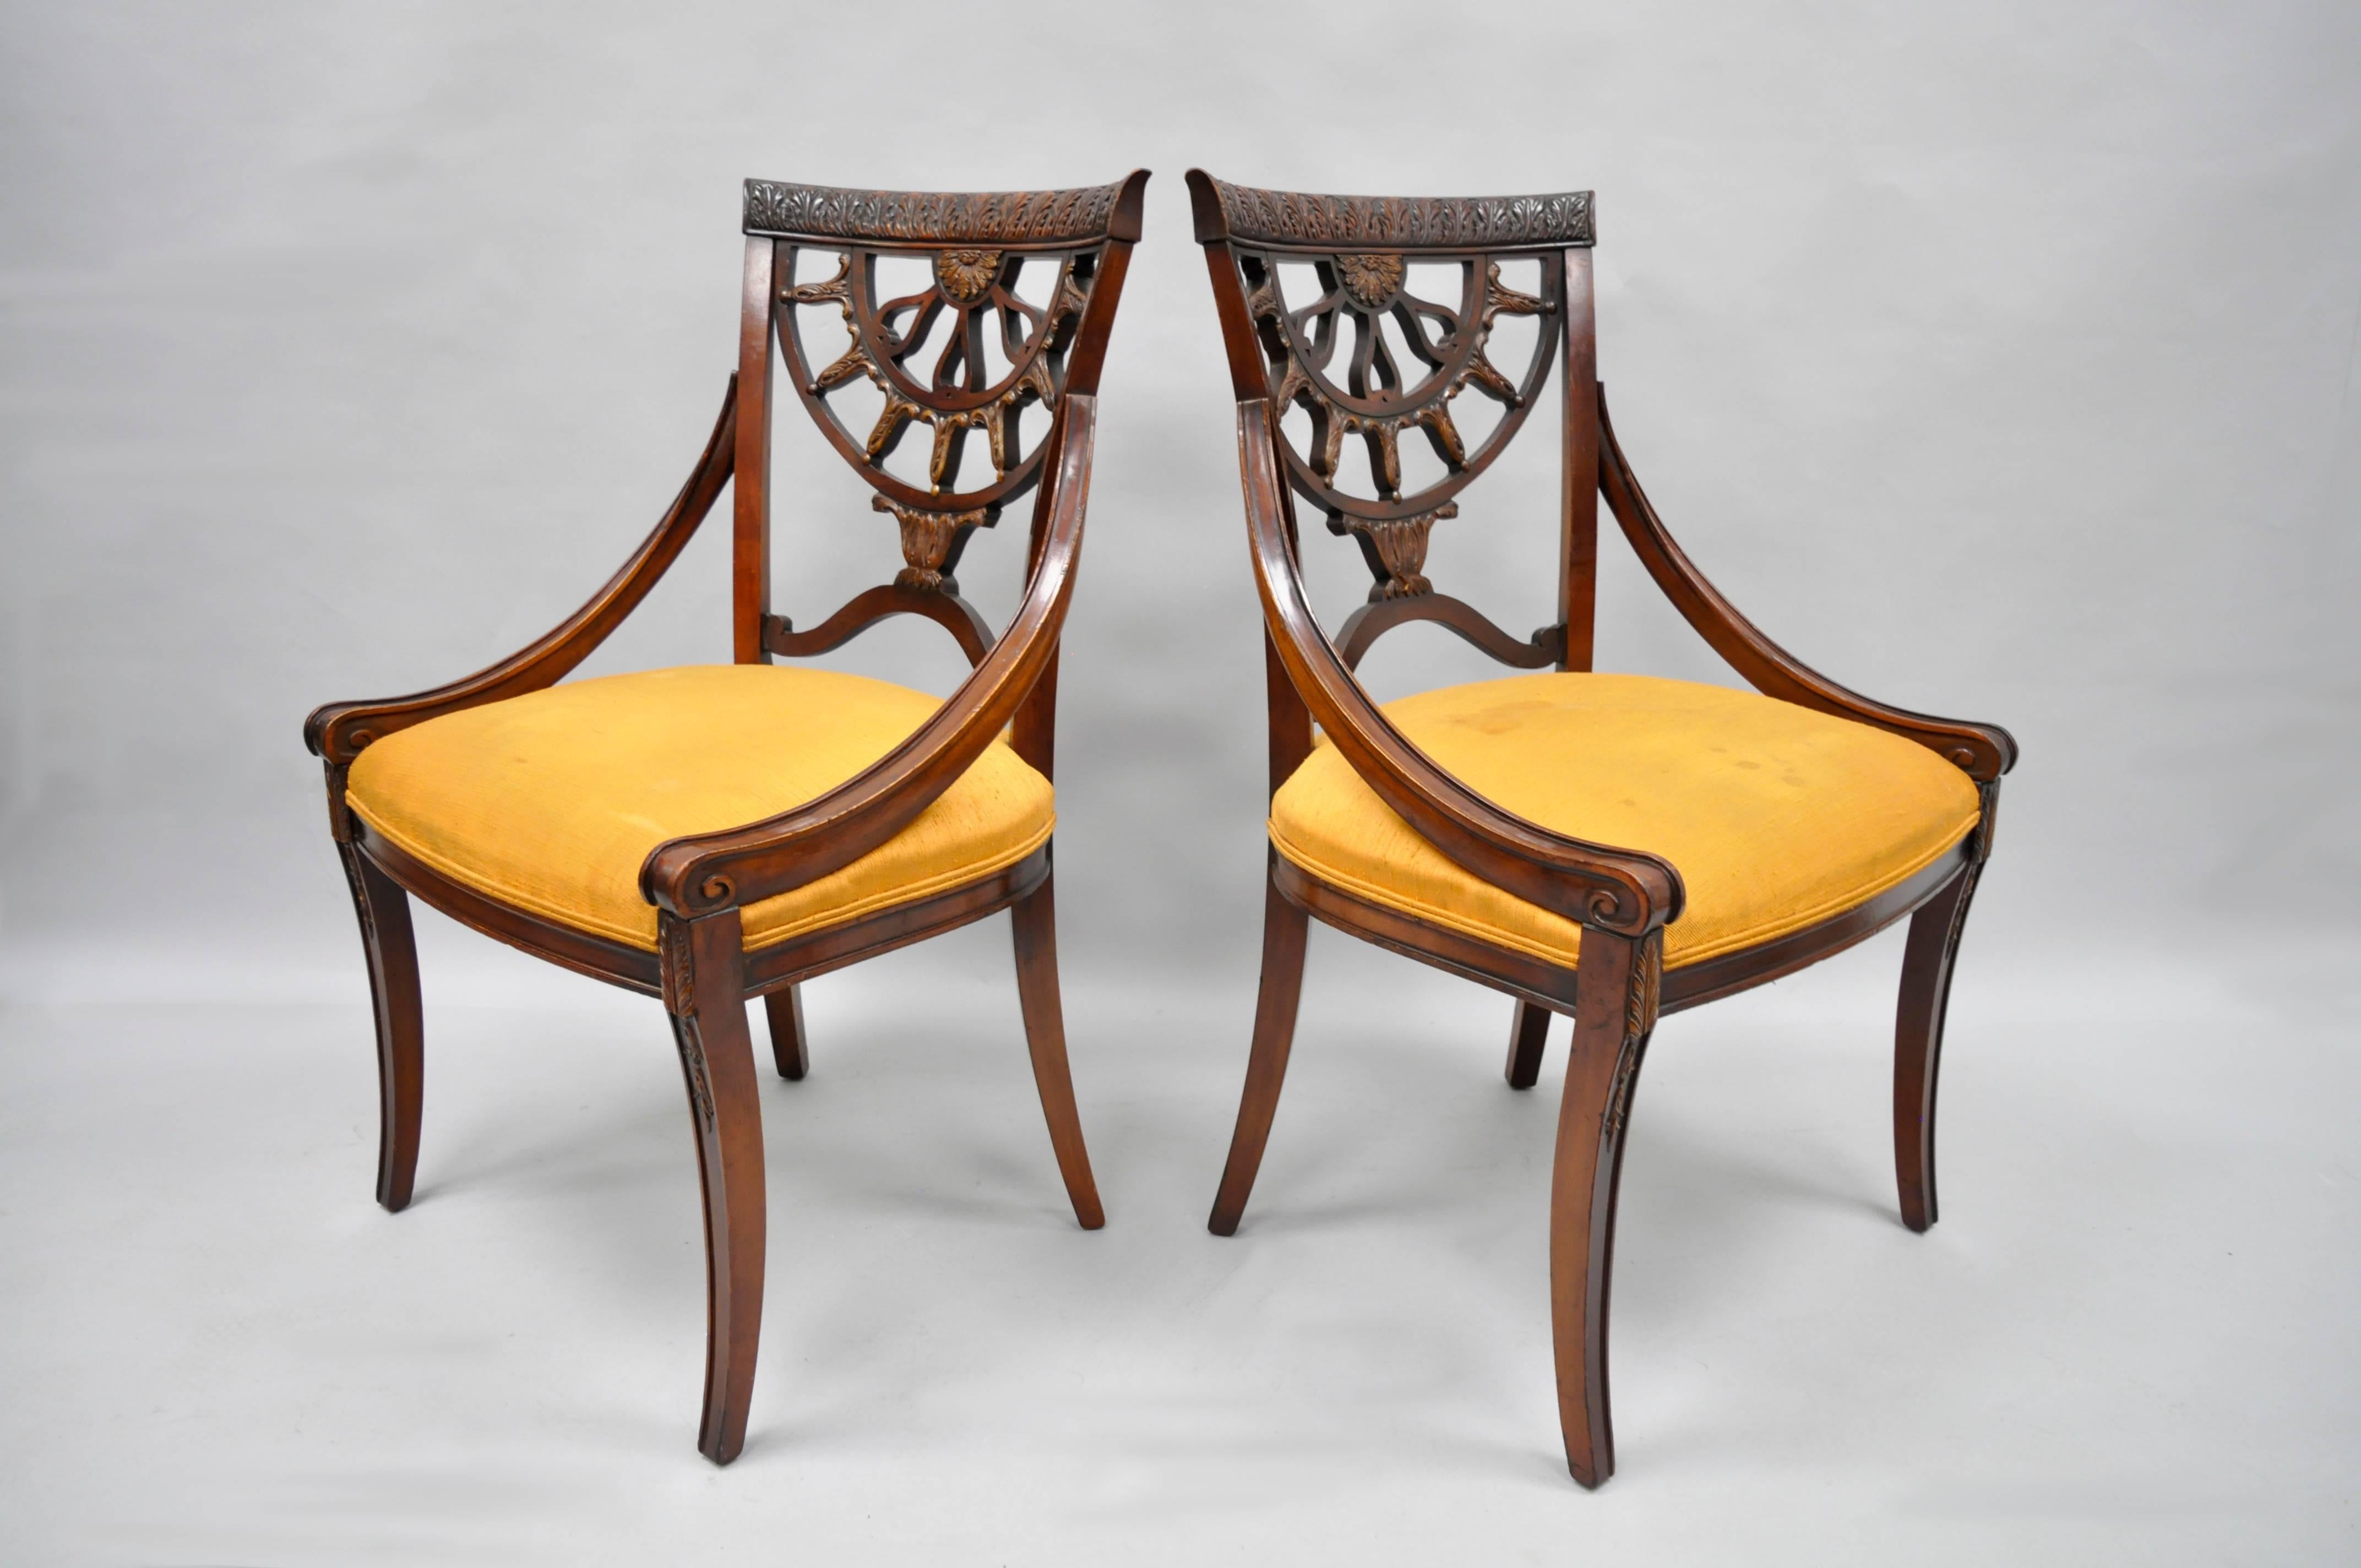 Pair of Antique French Regency Style Pierce Carved Mahogany Dining Room Chairs 5